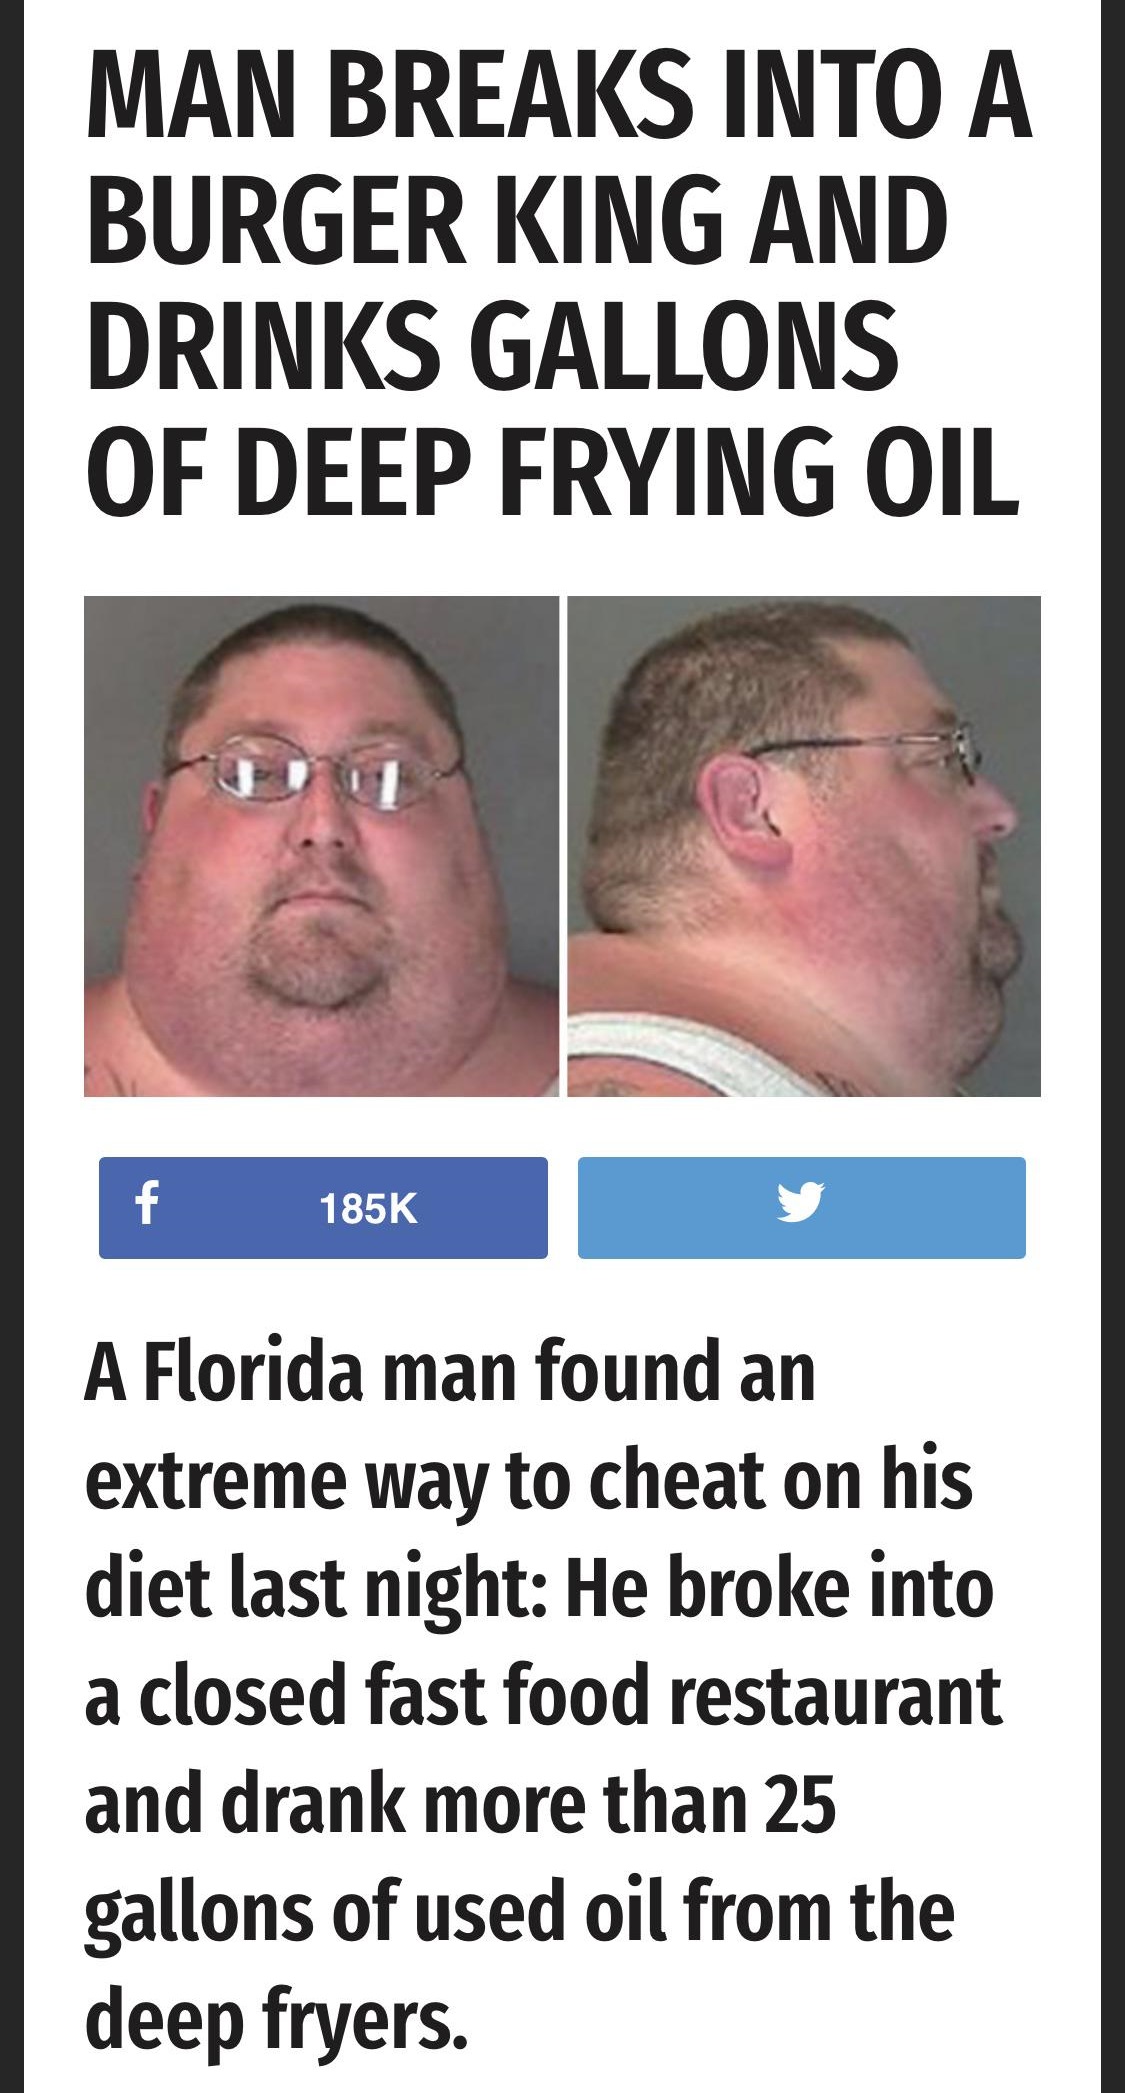 peter griffin in real life - Man Breaks Into A Burger King And Drinks Gallons Of Deep Frying Oil f A Florida man found an extreme way to cheat on his diet last night He broke into a closed fast food restaurant and drank more than 25 gallons of used oil fr